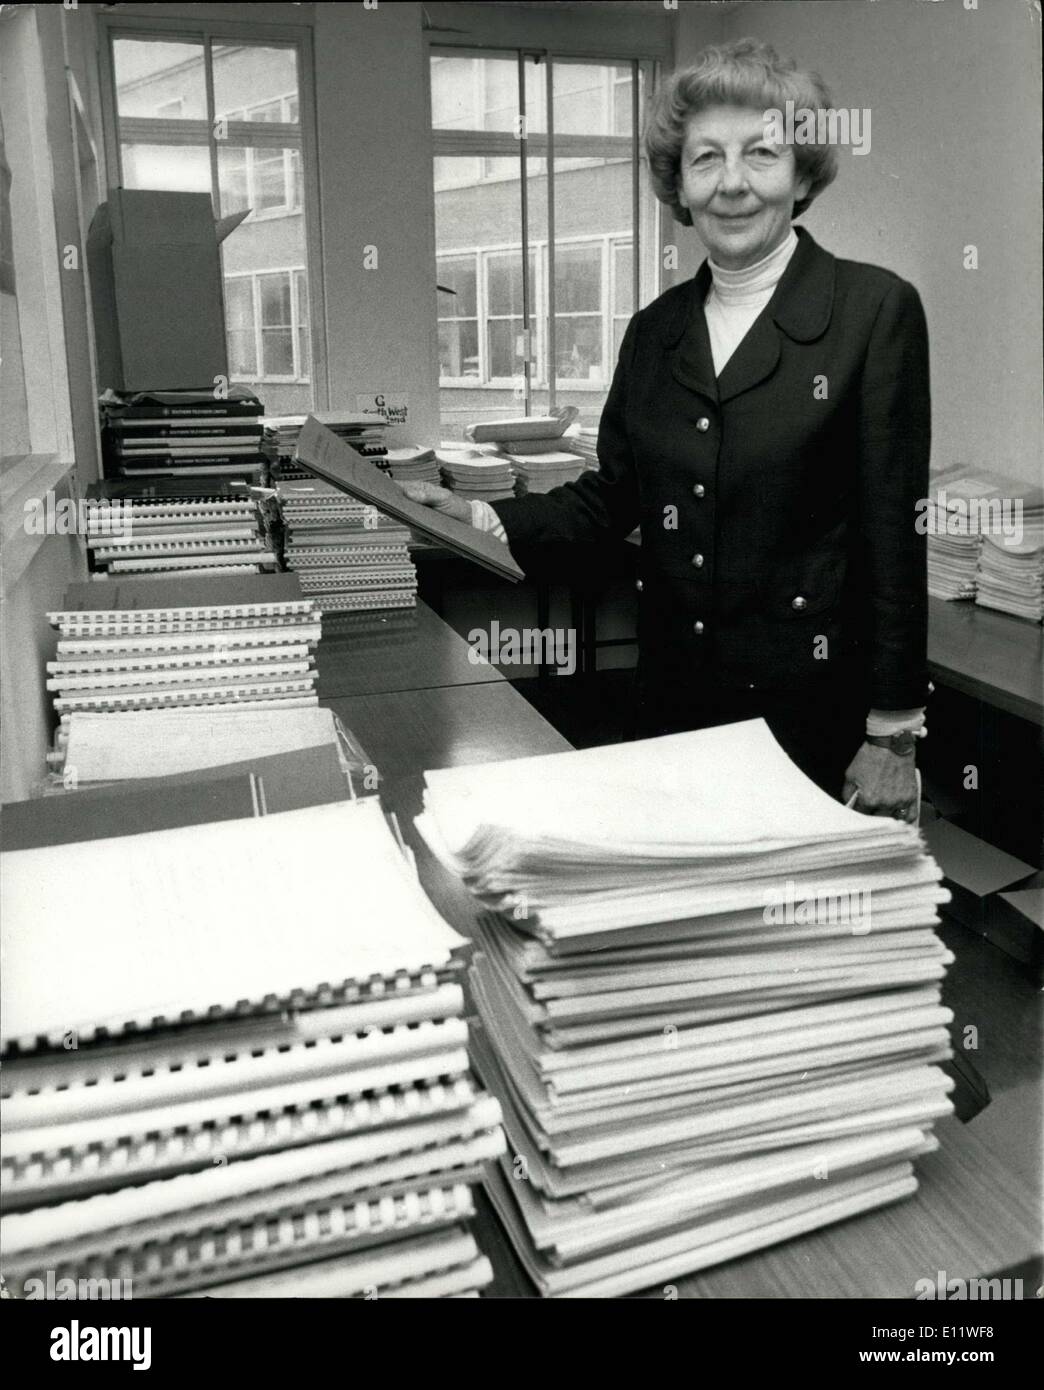 May 12, 1980 - Lady Plowden with applications for TV Breakfast Show: Lady Plowden, Chairman of the Independent Broadcasting Authority, surveying the task ahead at her Knightebridge headquarters, the stacks of applications to be considered for the new ITV franchises which will operate from 1982. Eight which includes Independent Television News, want to start National breakfast-time television. Stock Photo